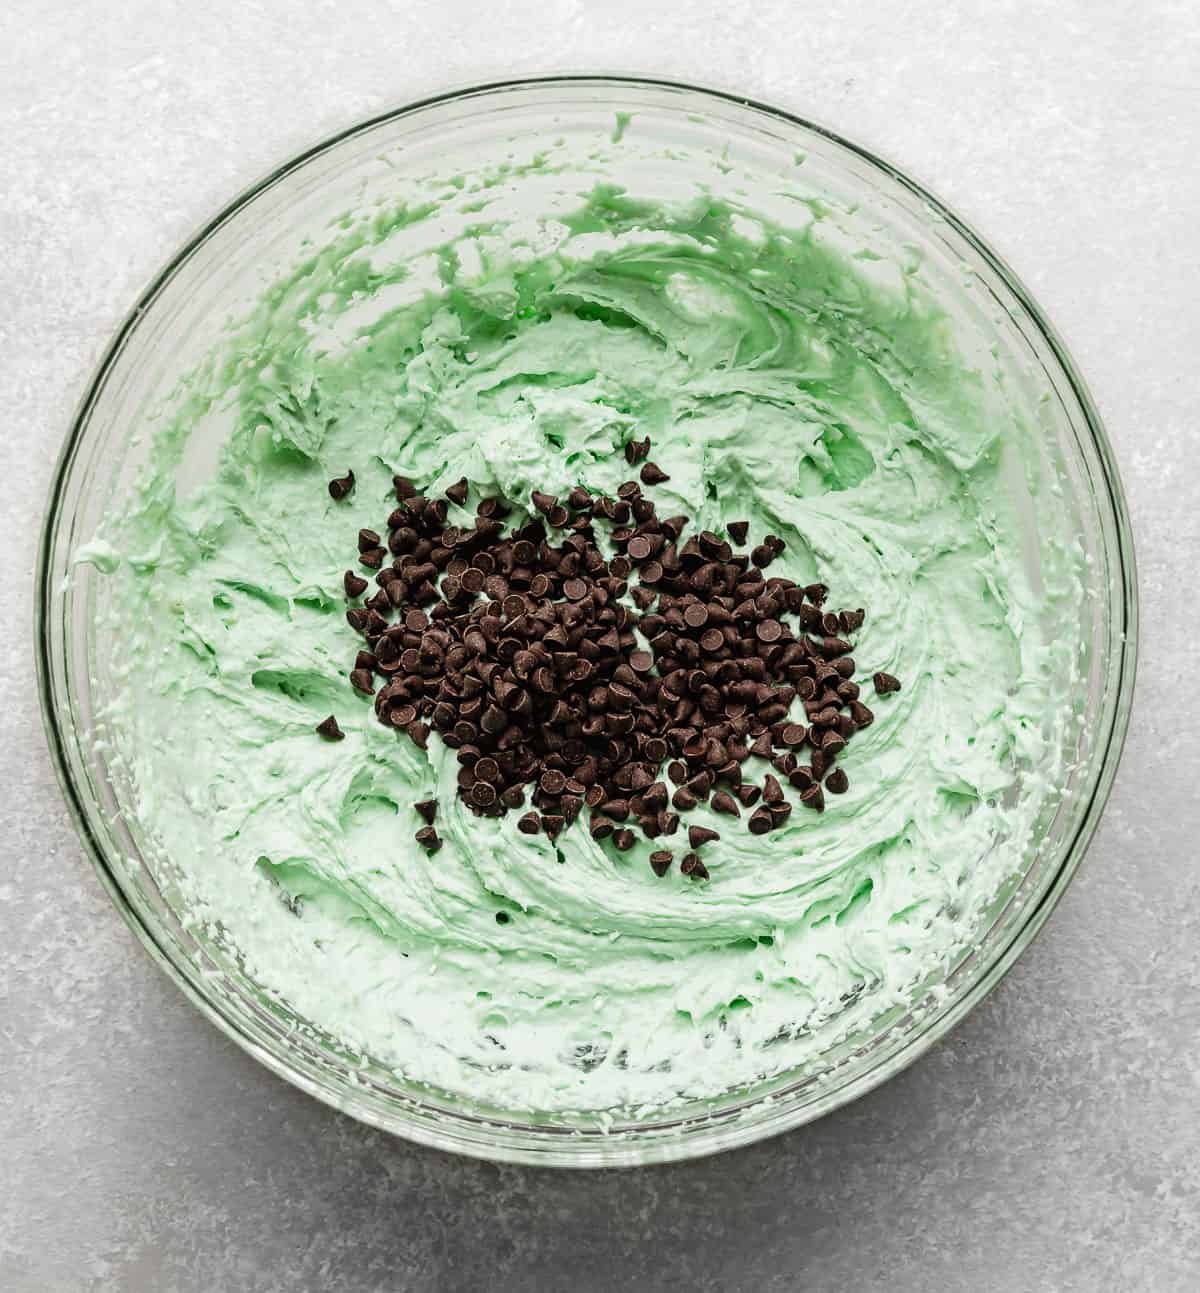 Mini chocolate chips in a mint colored frosting.